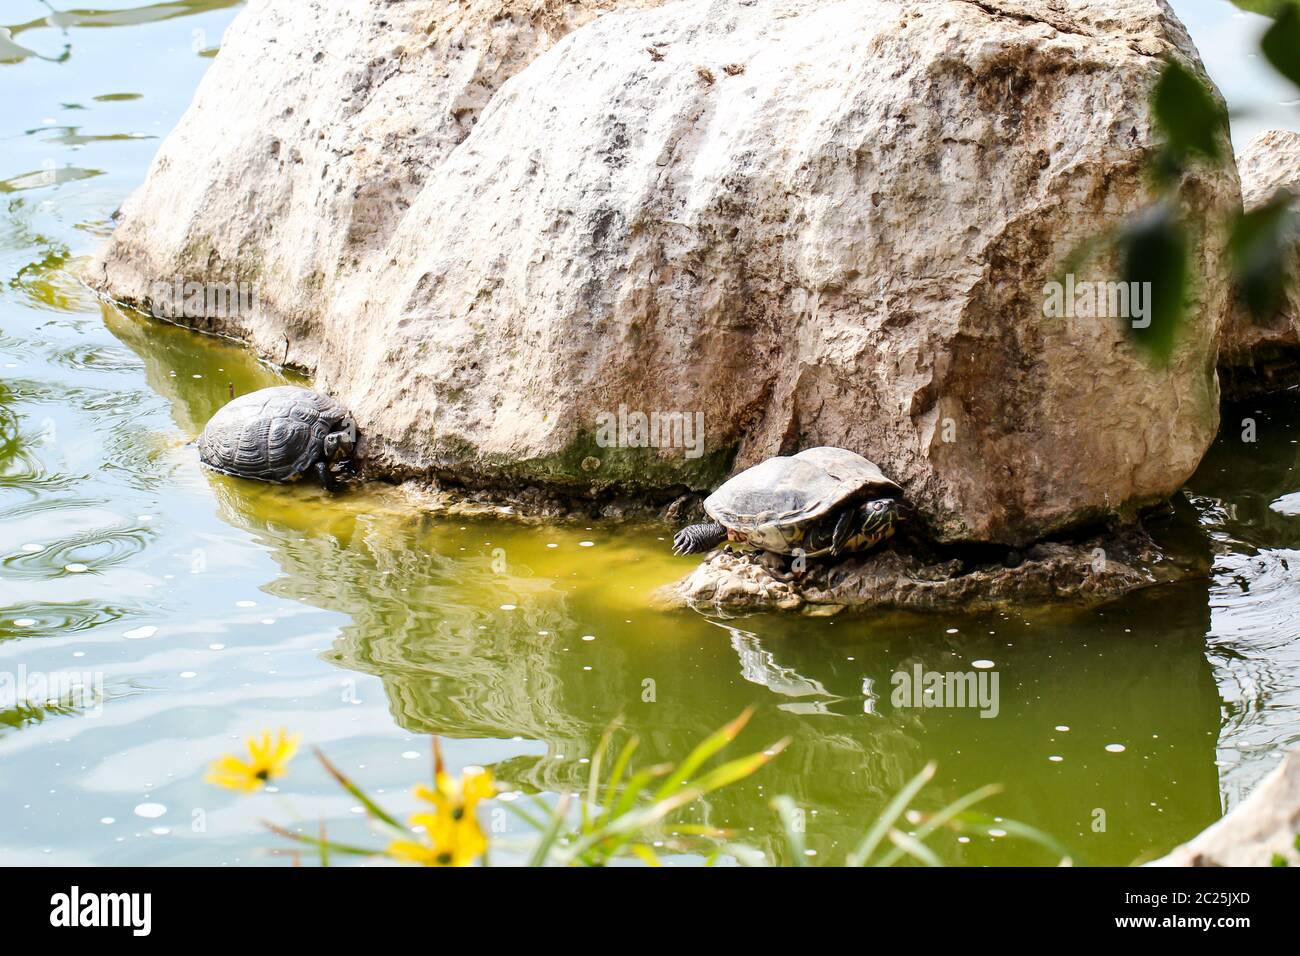 close up, details of turtle, turtles Stock Photo